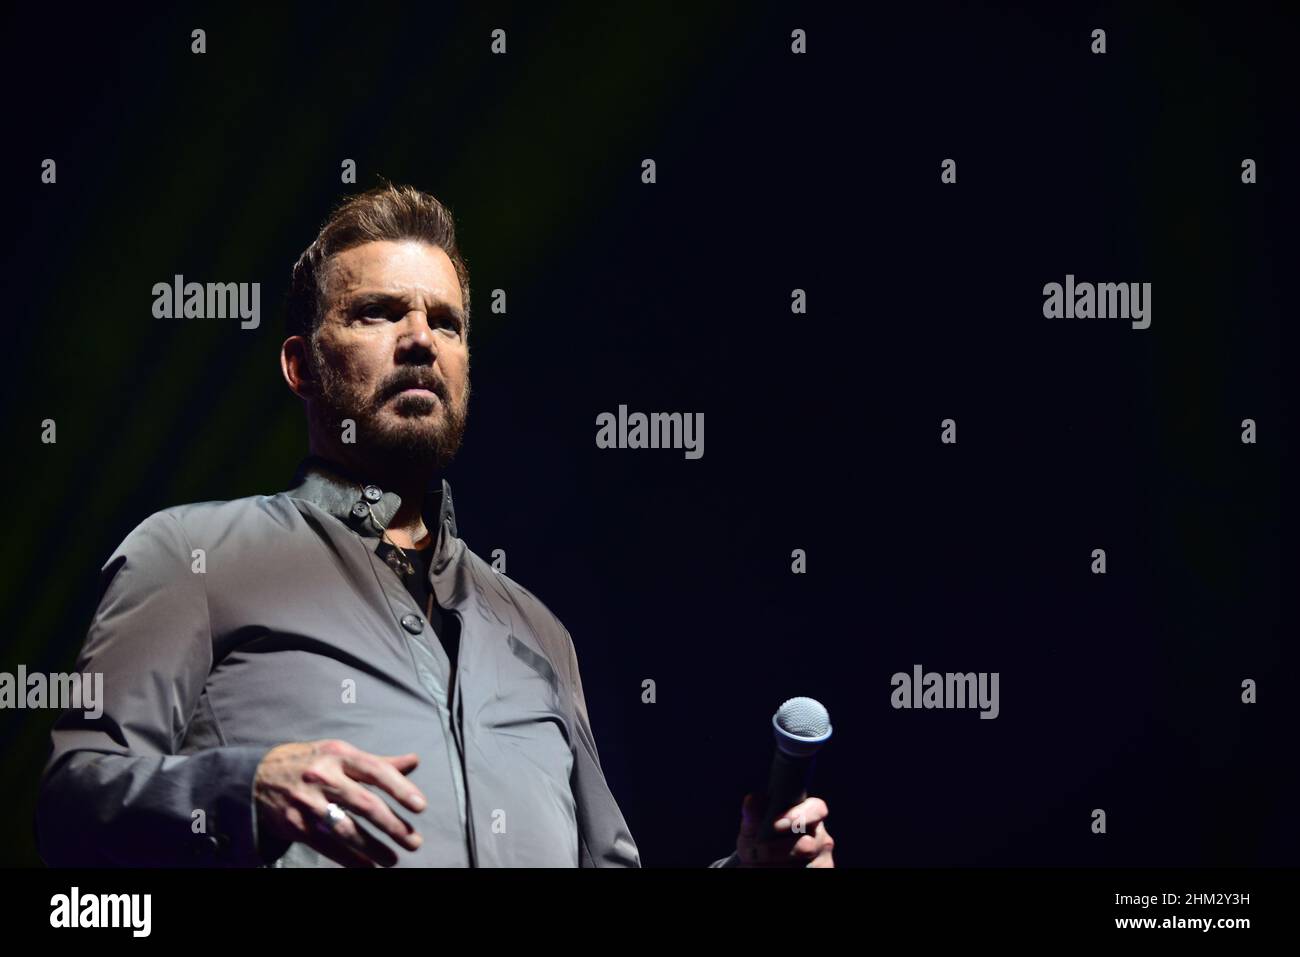 Miami, FL, USA. 05th Feb, 2022. Willy Chirino performs live on stage at James L. Knight Center on February 05, 2022 in Miami, Florida. Credit: Mpi10/Media Punch/Alamy Live News Stock Photo